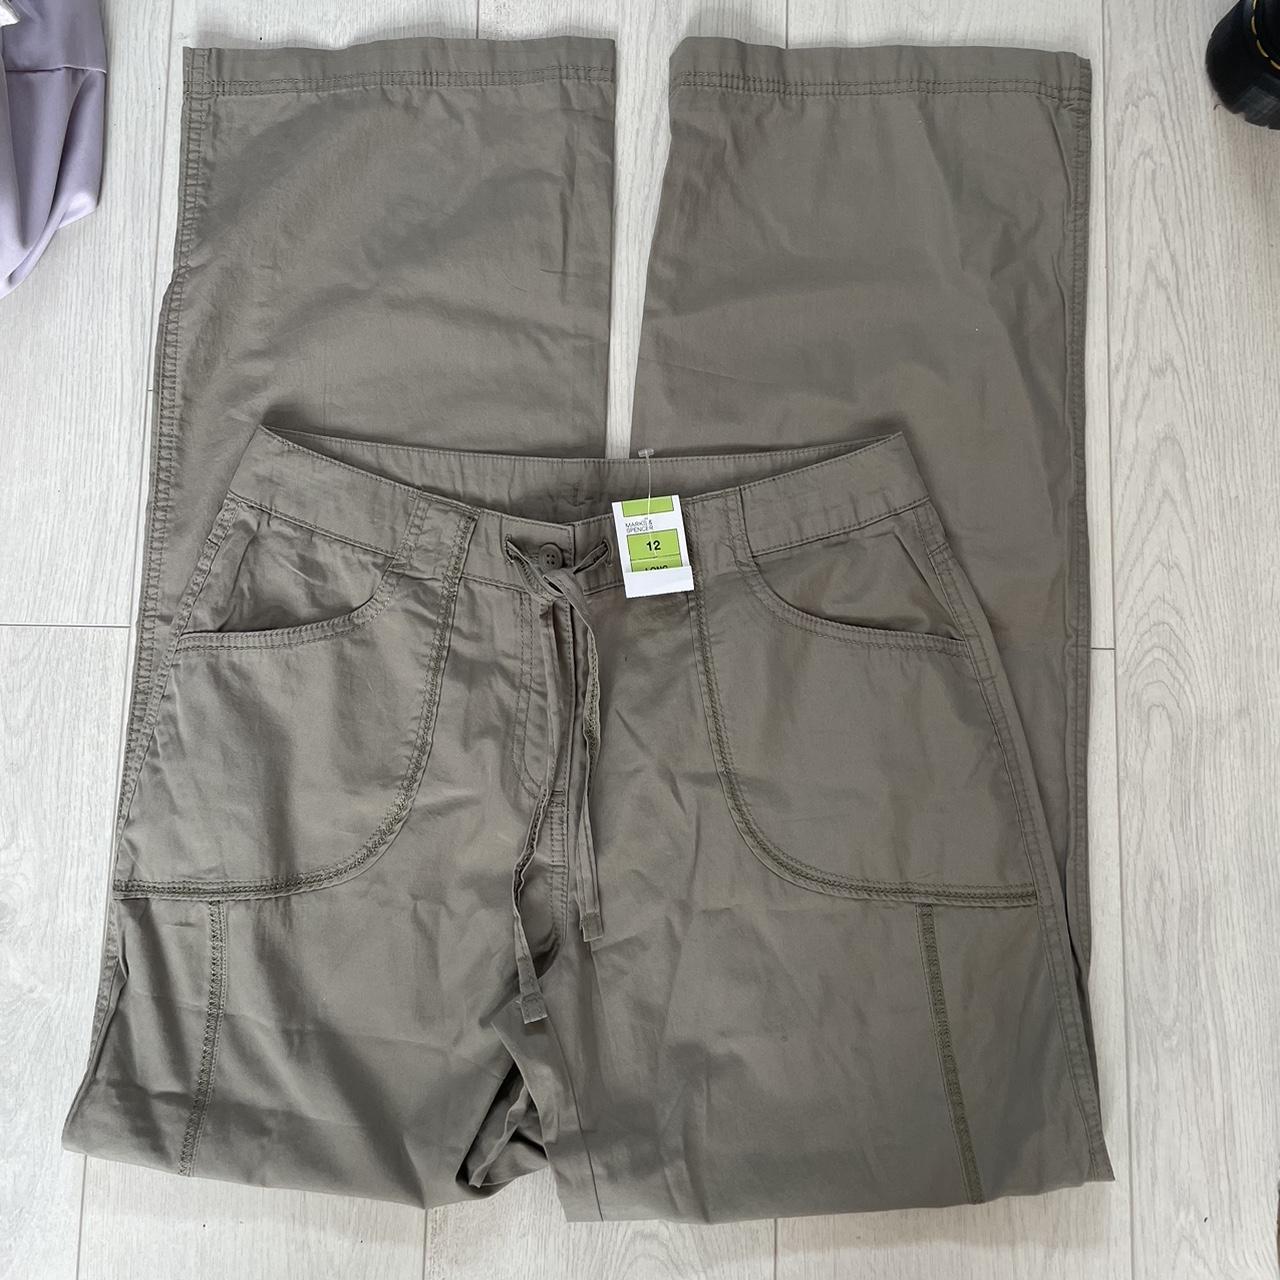 Khaki Green Cargo Pants size 12 new with tags x - Depop